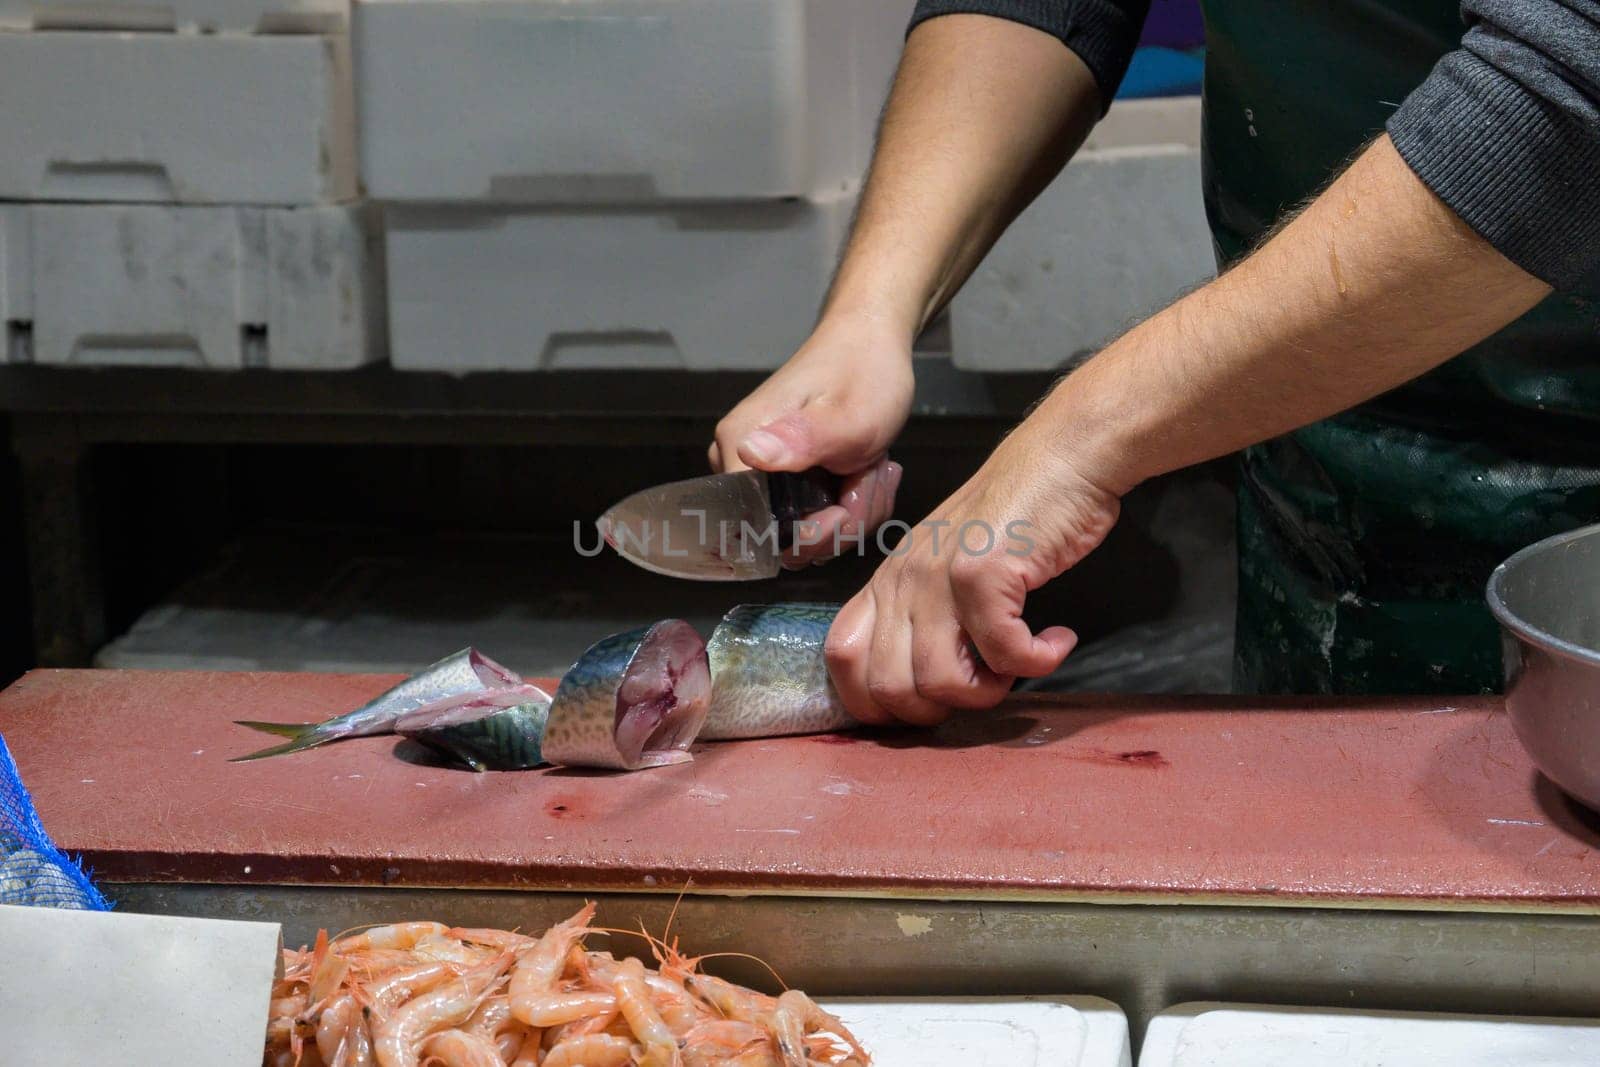 Closeup of male worker's hands cutting fish with knife at table by jcdiazhidalgo